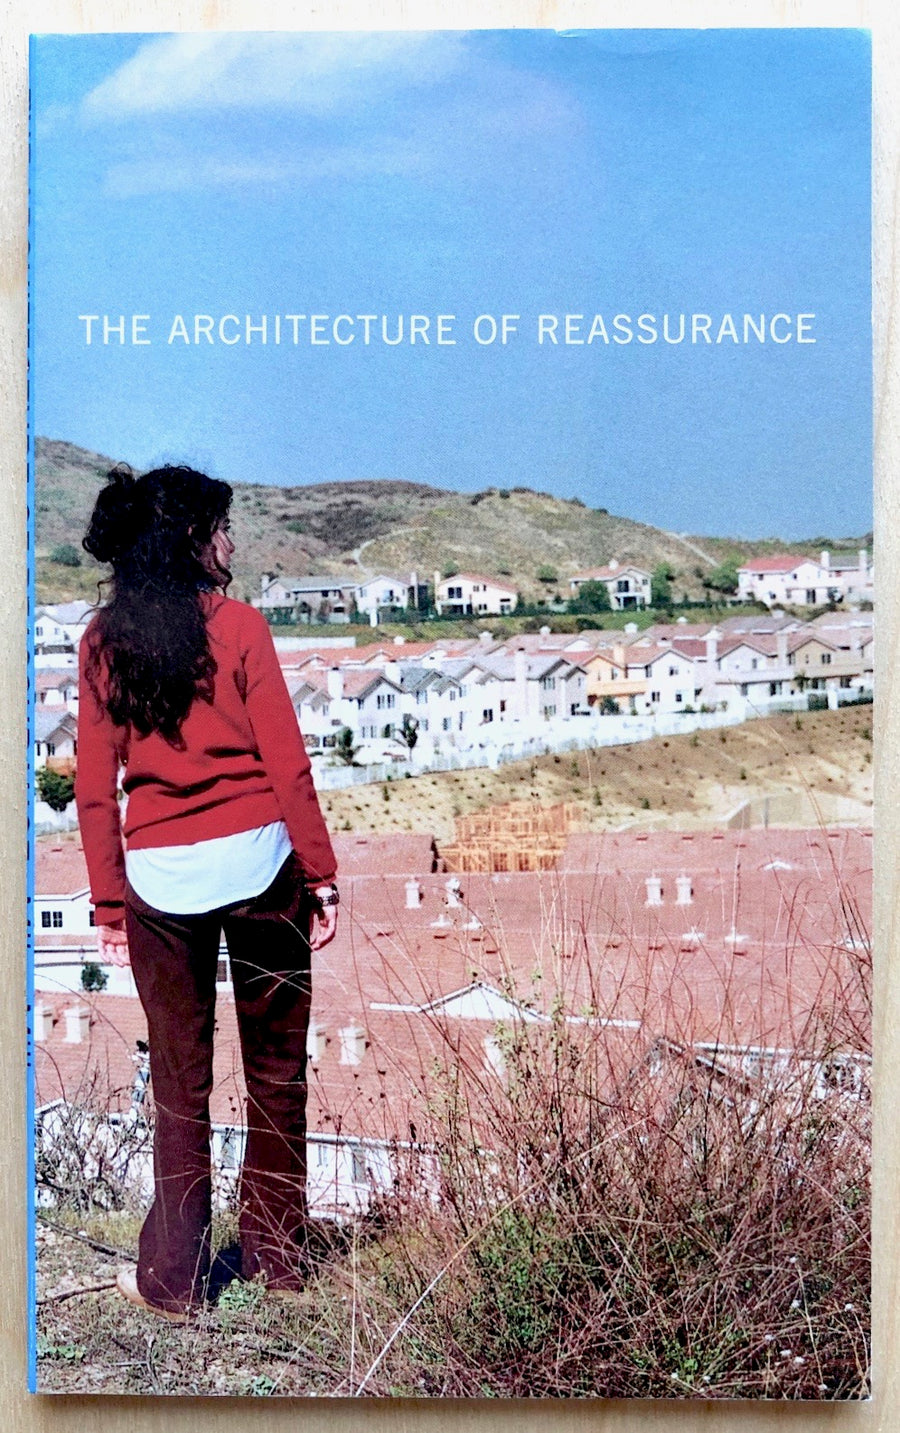 THE ARCHITECTURE OF REASSURANCE by Mike Mills